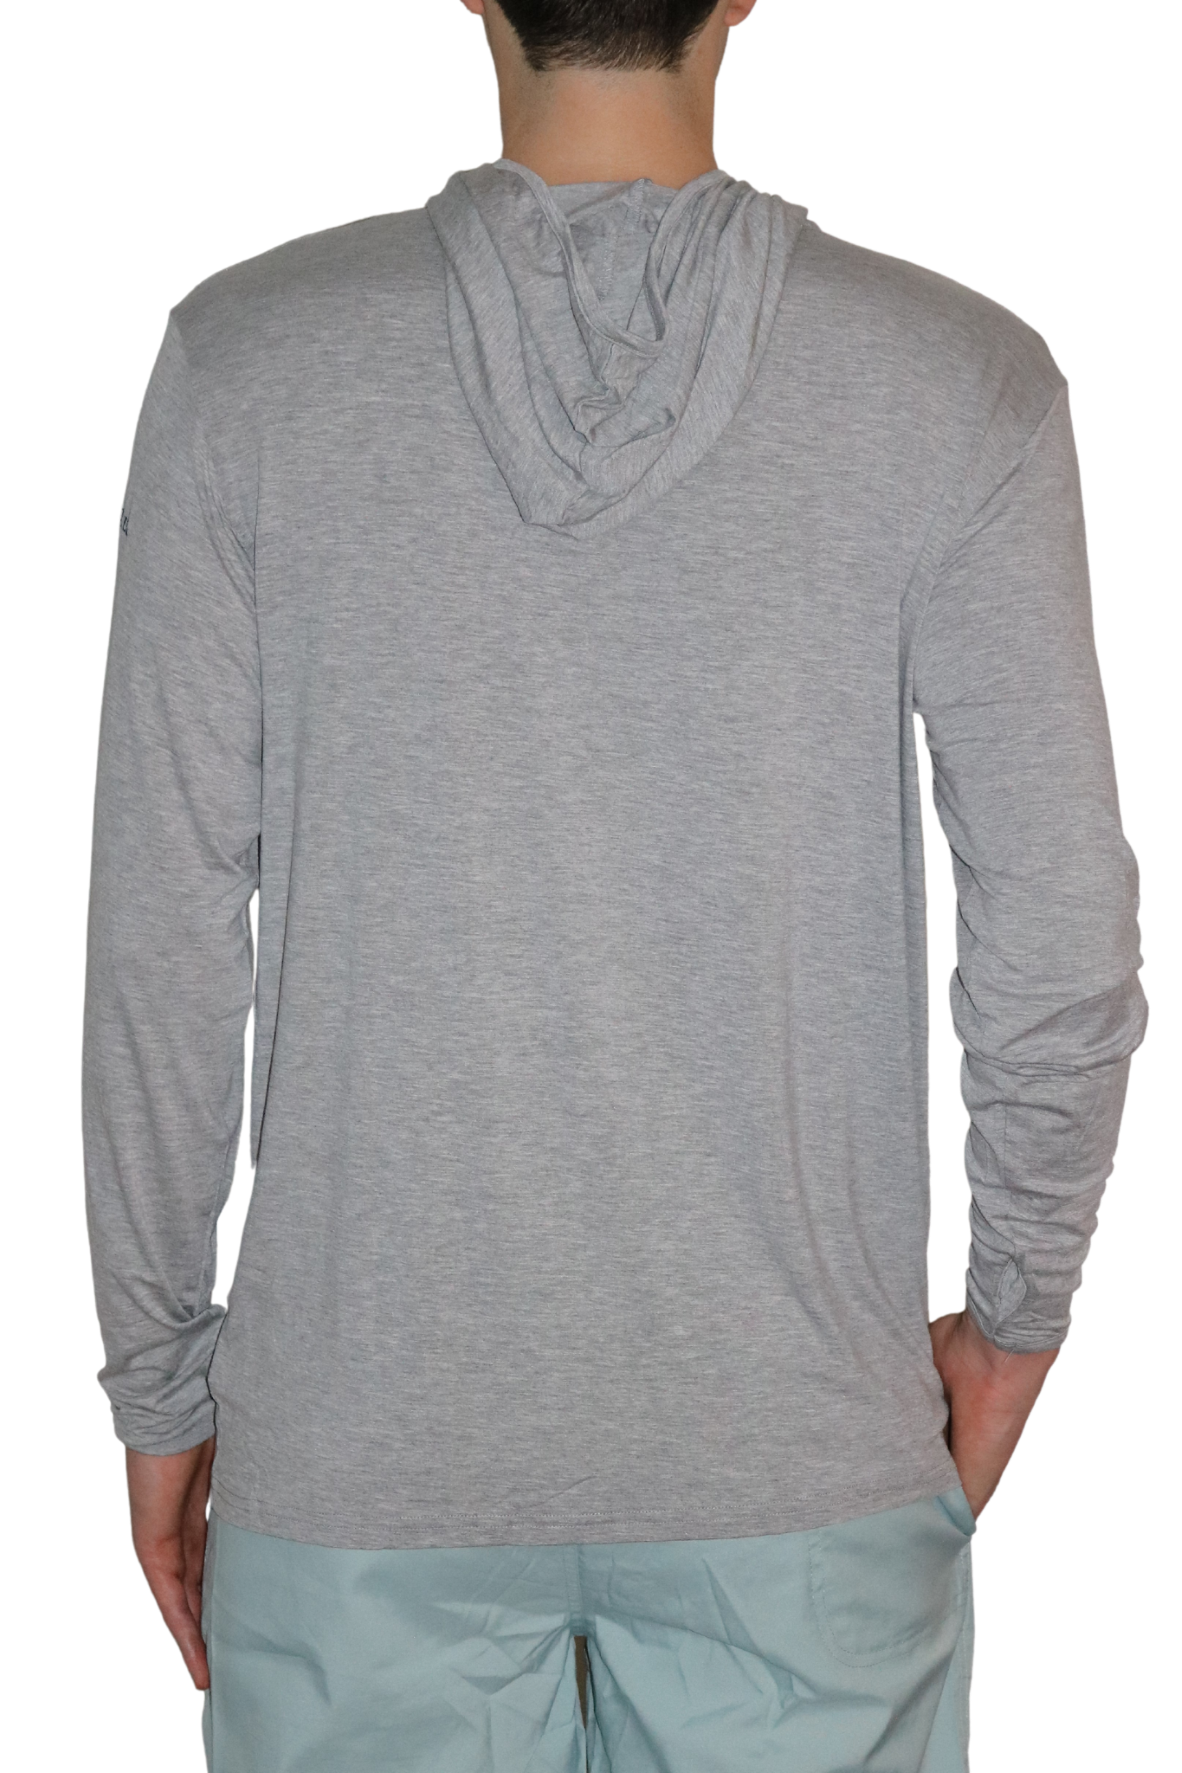 Back of the Angler Crossover Bamboo Hoodie in Heather Grey.